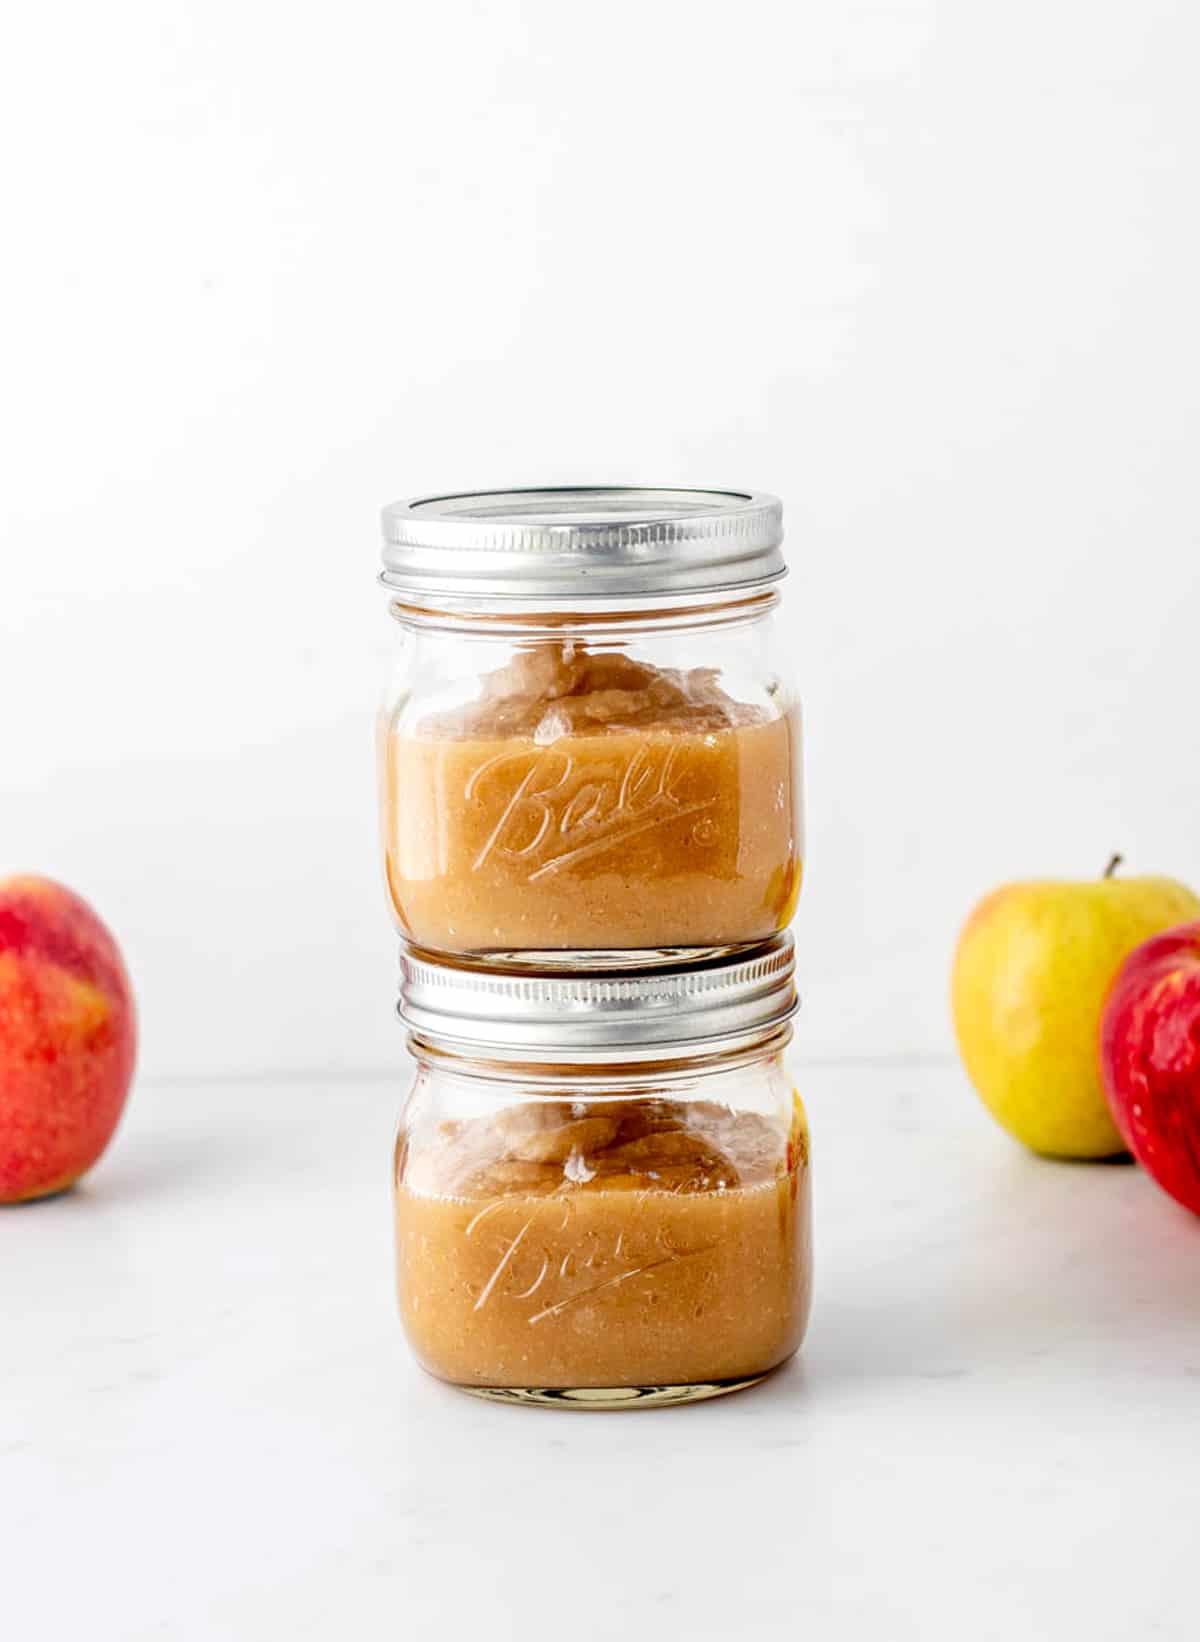 Two jars of homemade unsweetened applesauce stacked on top of each other.